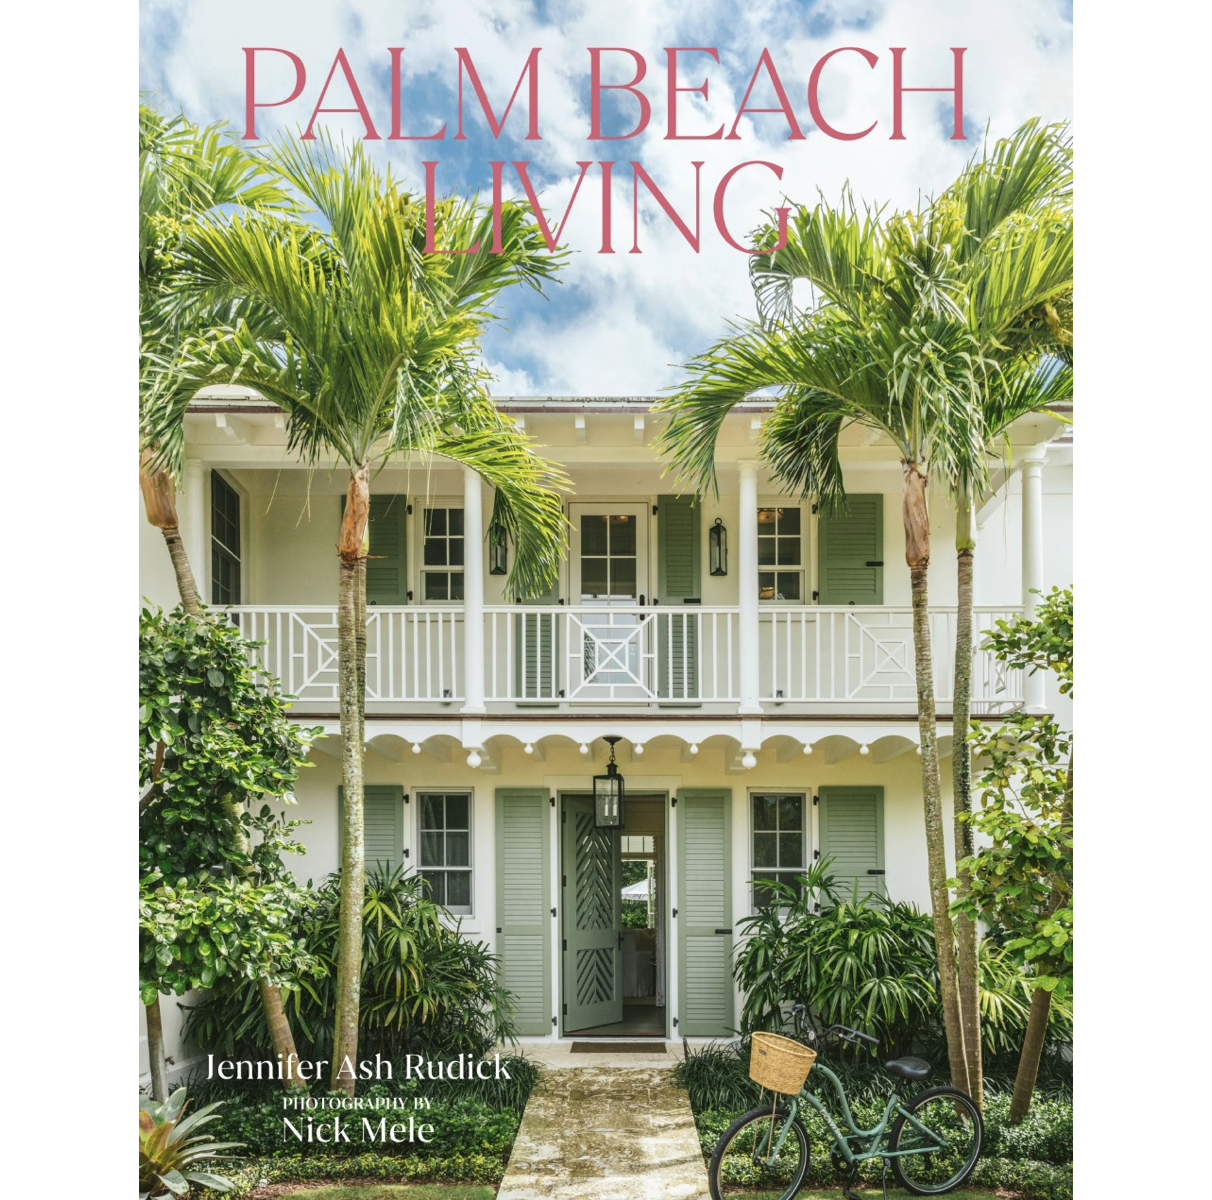 Cover of Palm Beach Living by Jennifer Ash Rudick with facade of home with green shutters and palm trees